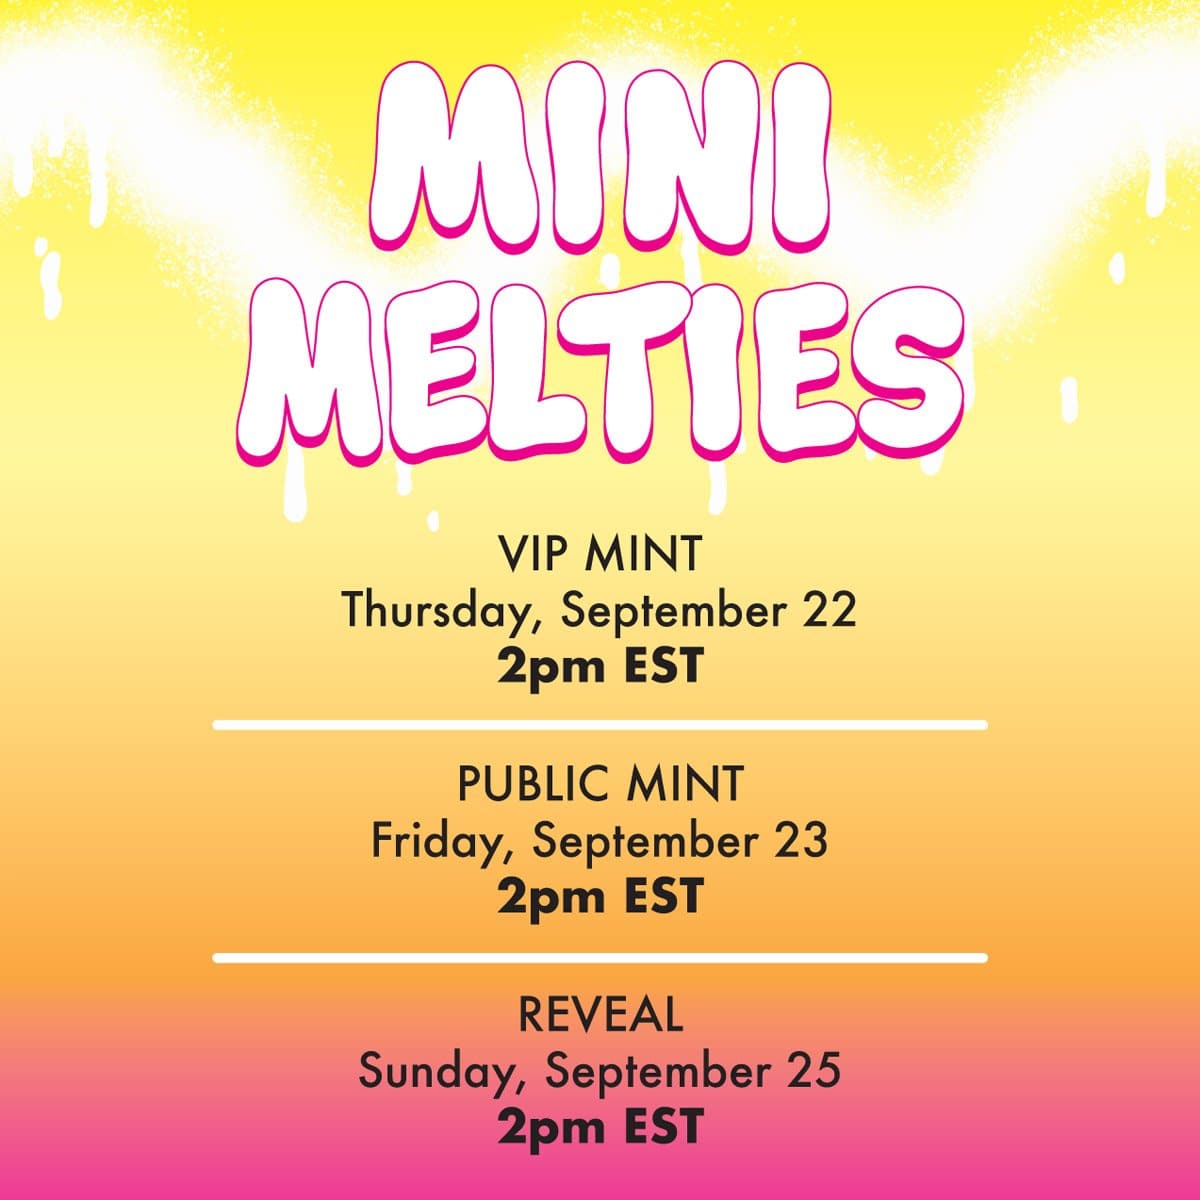 image of NFT's upcoming mint poster for Mini Melties